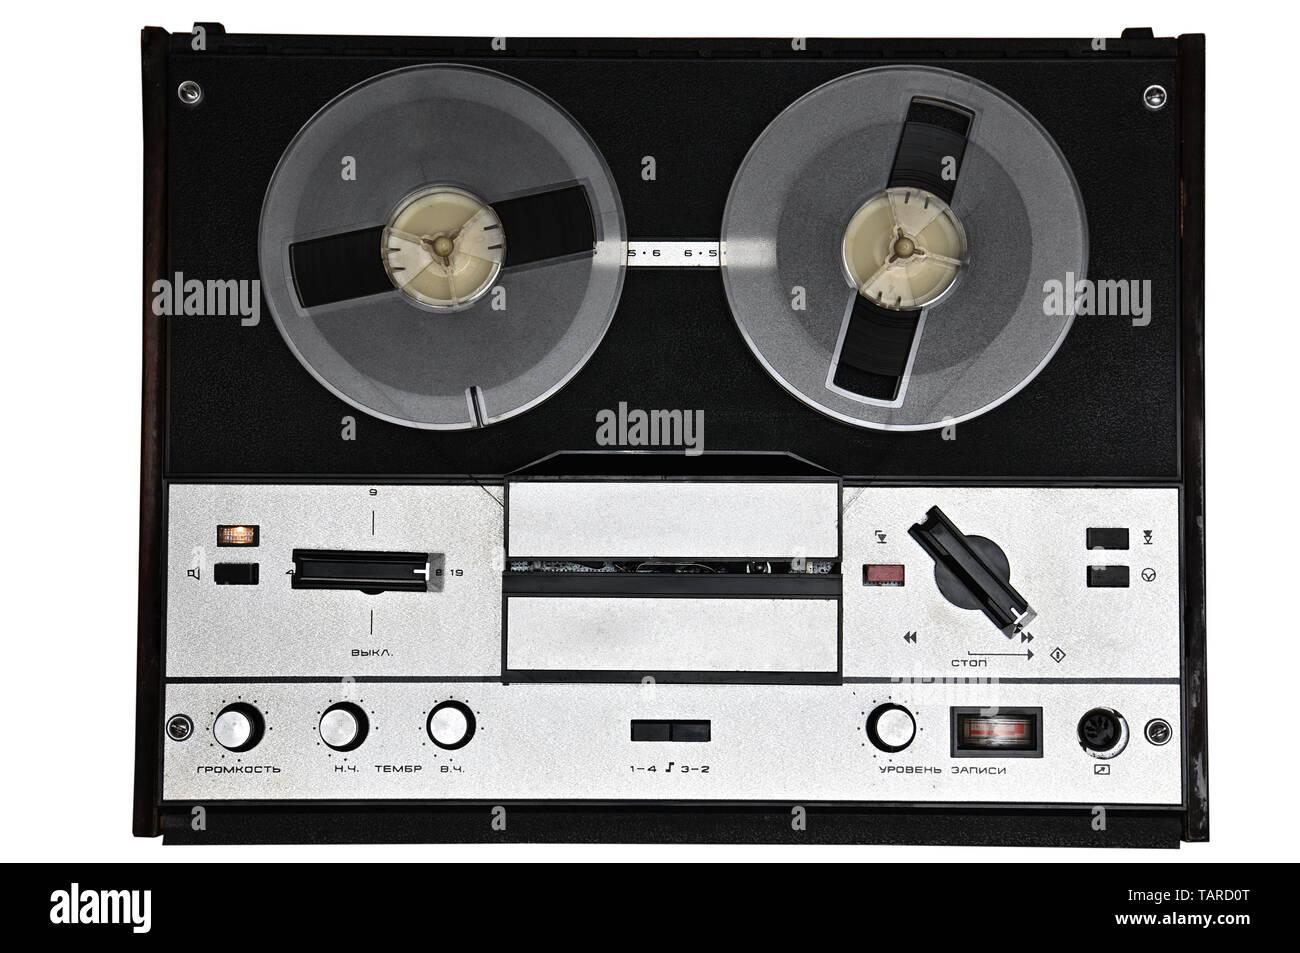 https://c8.alamy.com/comp/TARD0T/vintage-reel-to-reel-tape-recorder-on-isolated-white-background-retro-tape-recorder-from-the-soviet-union-TARD0T.jpg